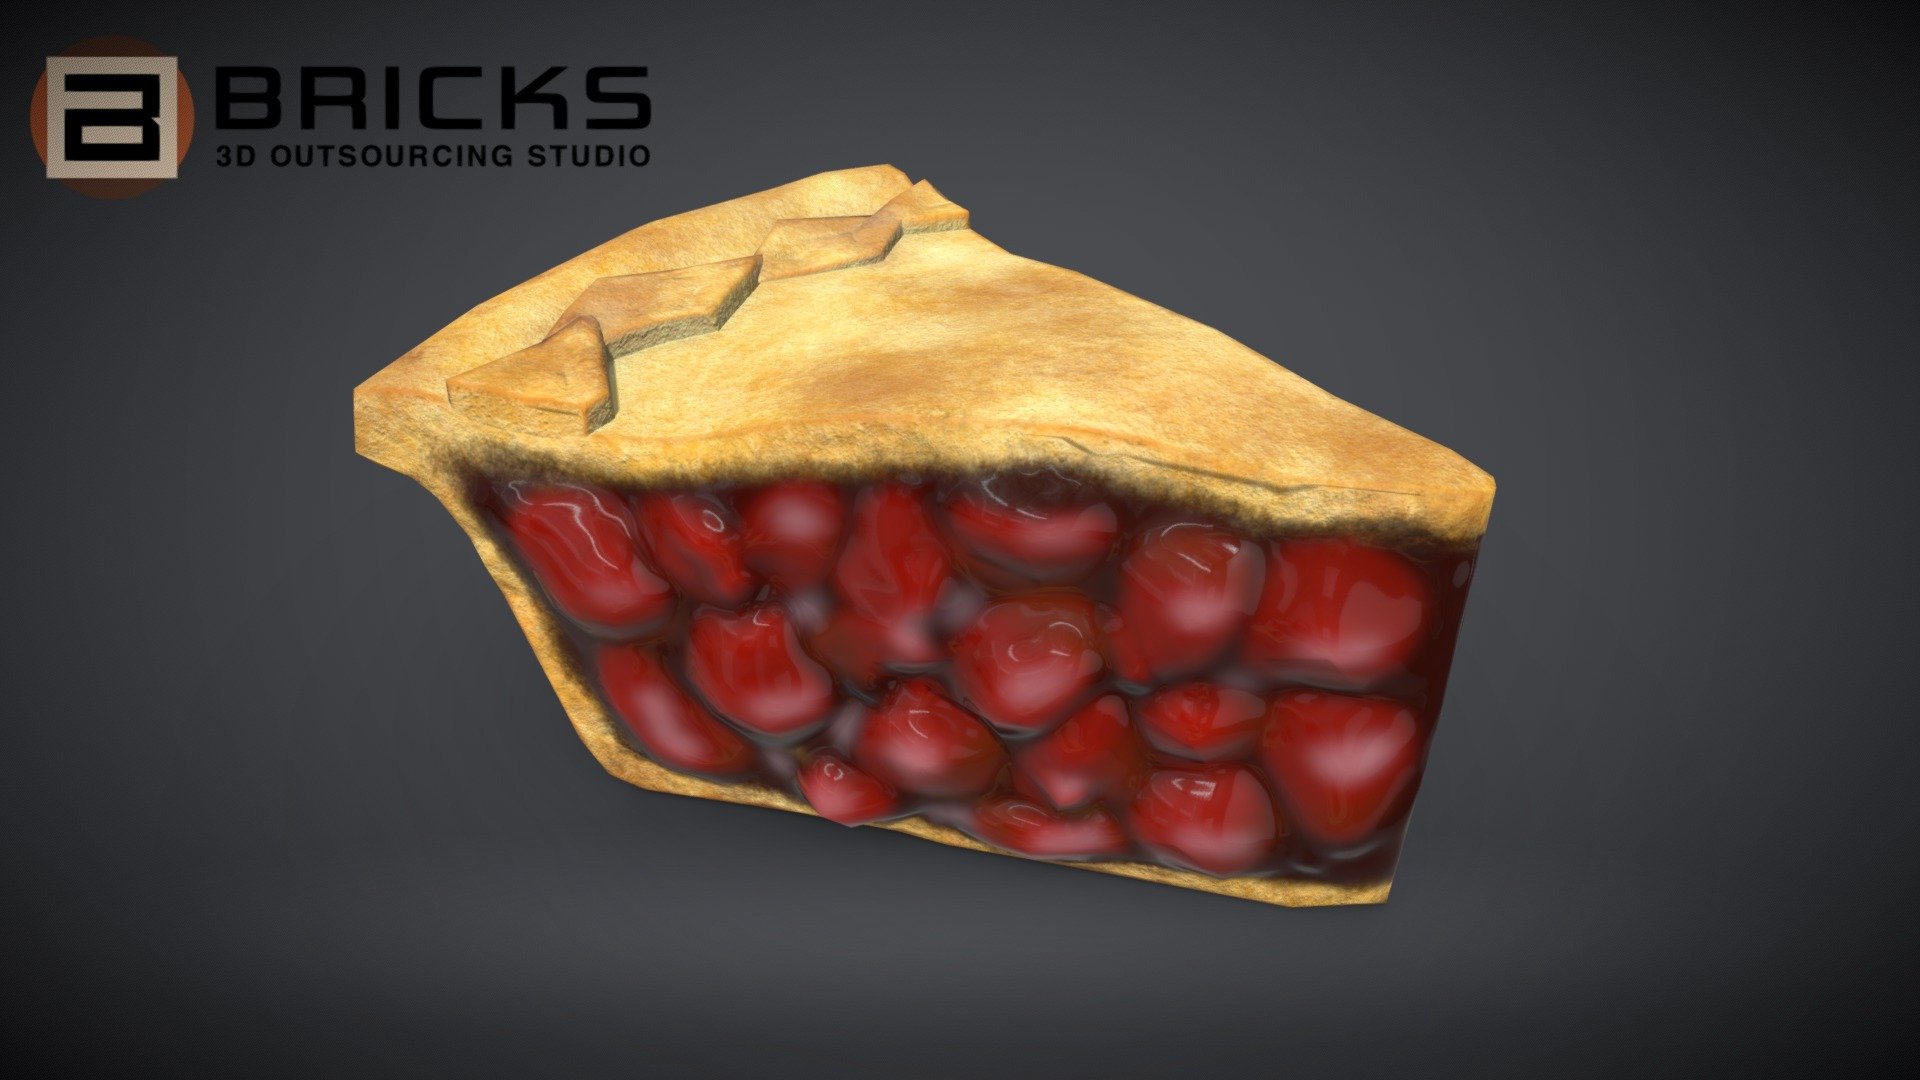 PBR Food Asset:
CherryPiePiece
Polycount: 954
Vertex count: 479
Texture Size: 2048px x 2048px
Normal: OpenGL

If you need any adjust in file please contact us: team@bricks3dstudio.com

Hire us: tringuyen@bricks3dstudio.com
Here is us: https://www.bricks3dstudio.com/
        https://www.artstation.com/bricksstudio
        https://www.facebook.com/Bricks3dstudio/
        https://www.linkedin.com/in/bricks-studio-b10462252/ - CherryPiePiece - Buy Royalty Free 3D model by Bricks Studio (@bricks3dstudio) 3d model